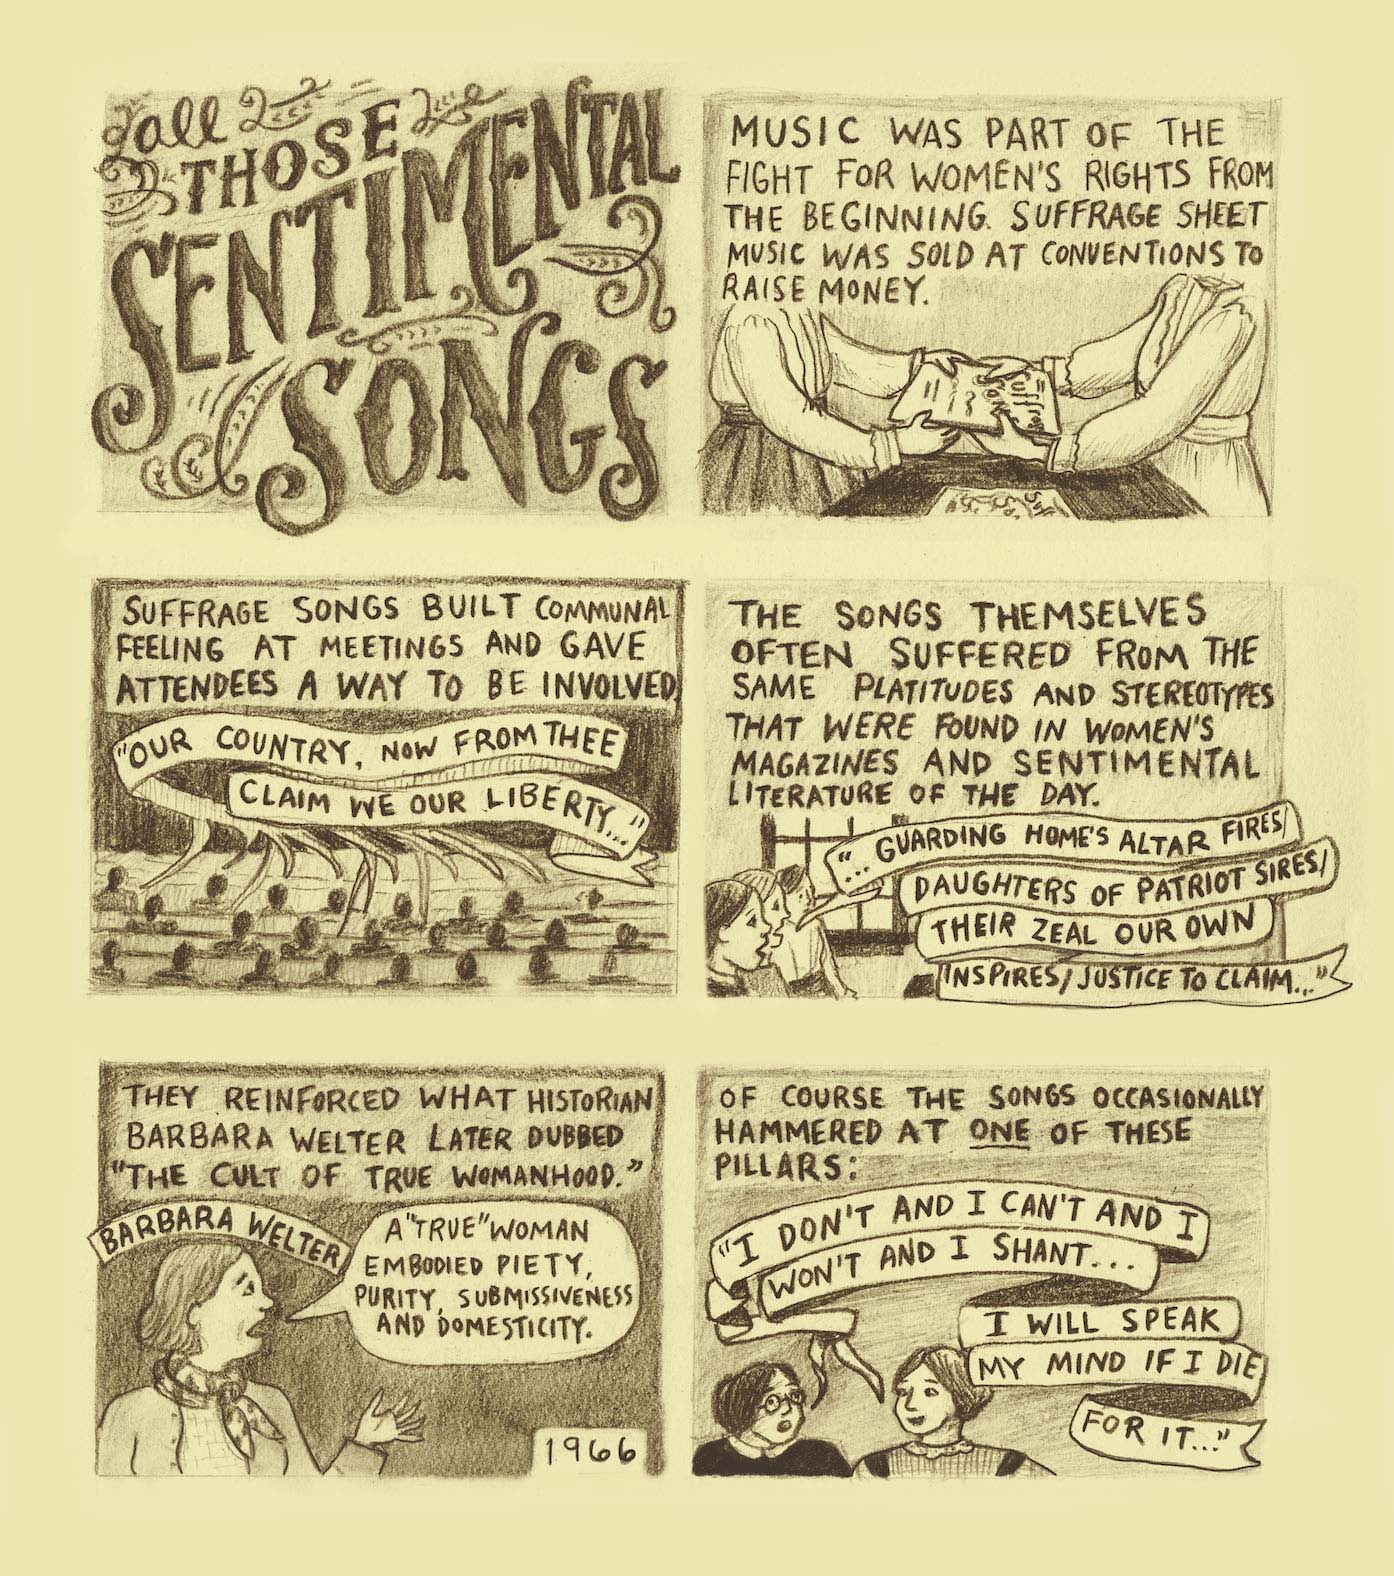 An excerpt from Caitlin Cass's graphic nonfiction book discusses suffragette songs